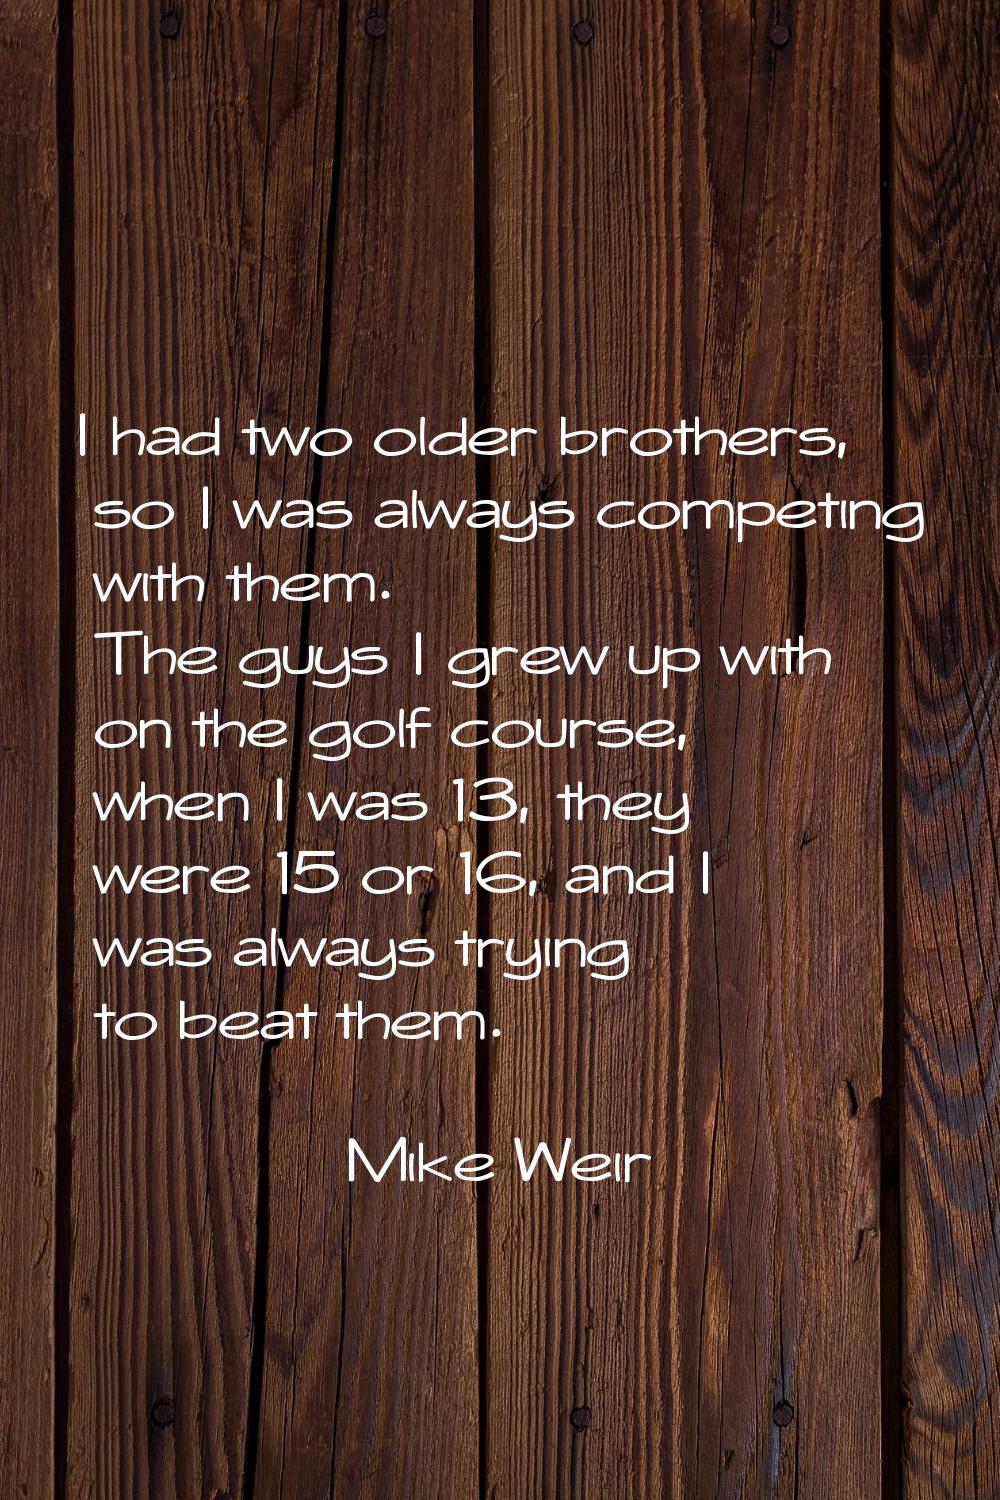 I had two older brothers, so I was always competing with them. The guys I grew up with on the golf 